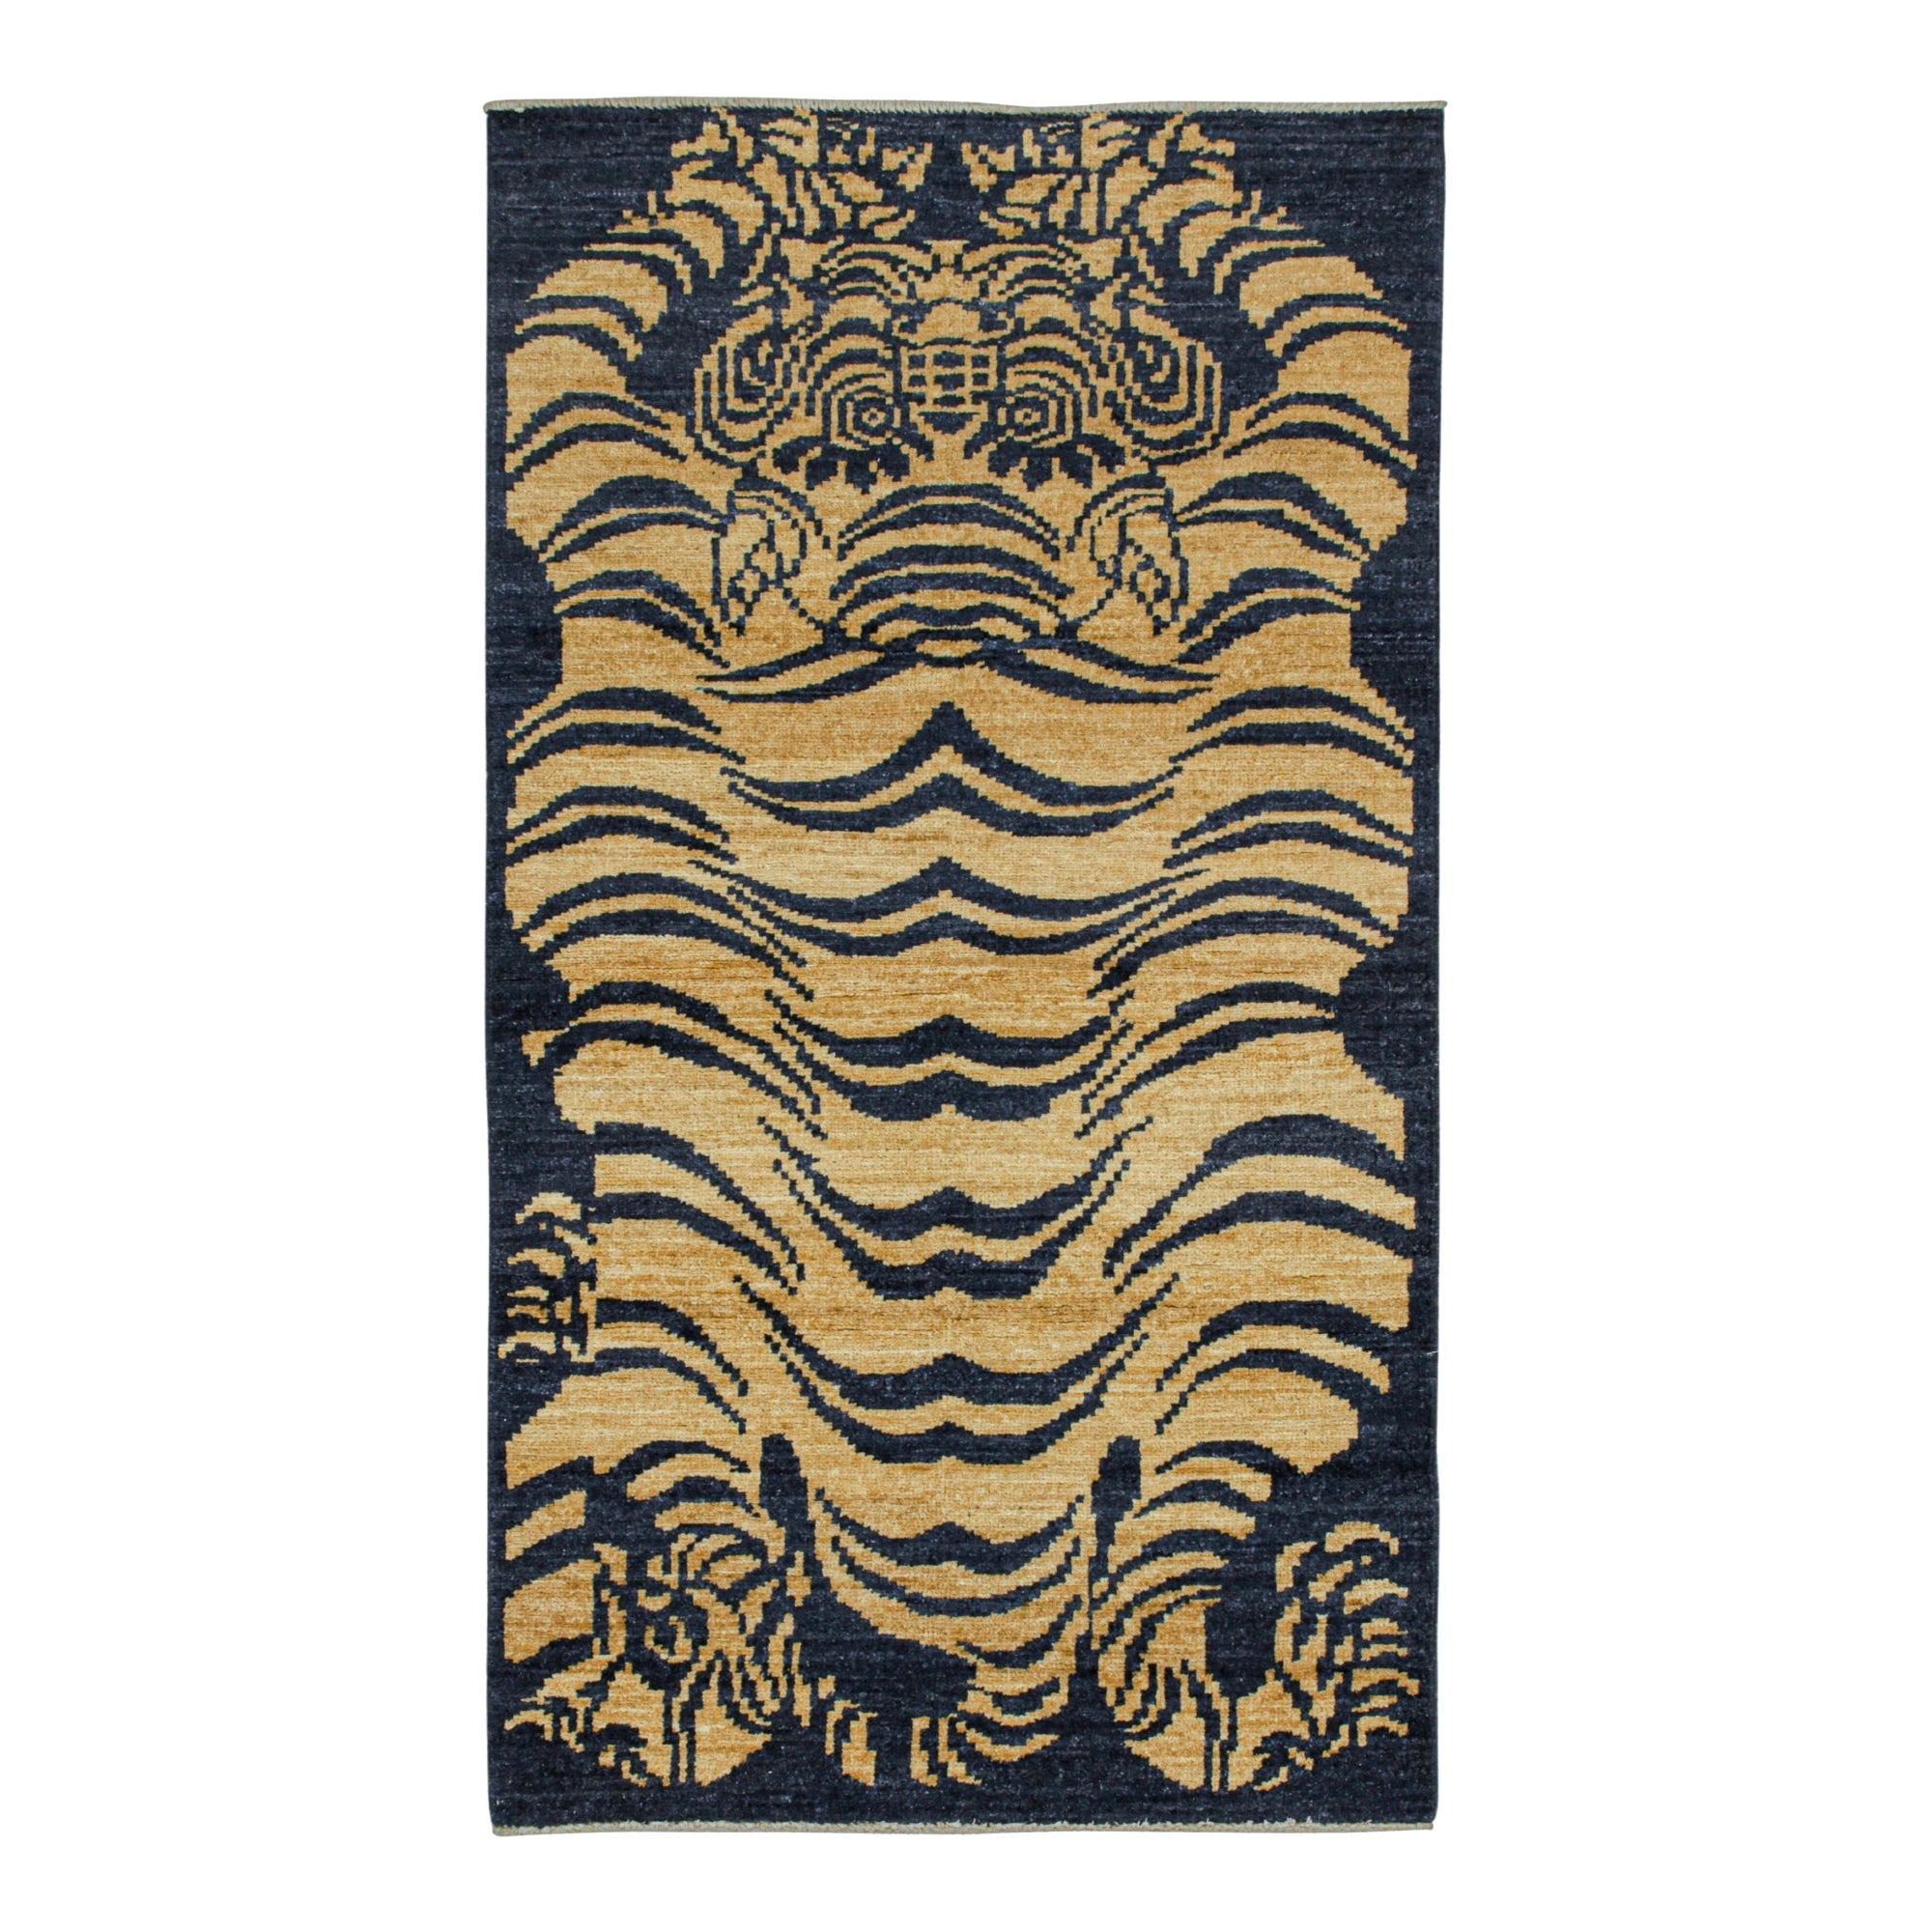 Rug & Kilim’s Classic Style Tiger Runner in Navy Blue and Gold Pictorial